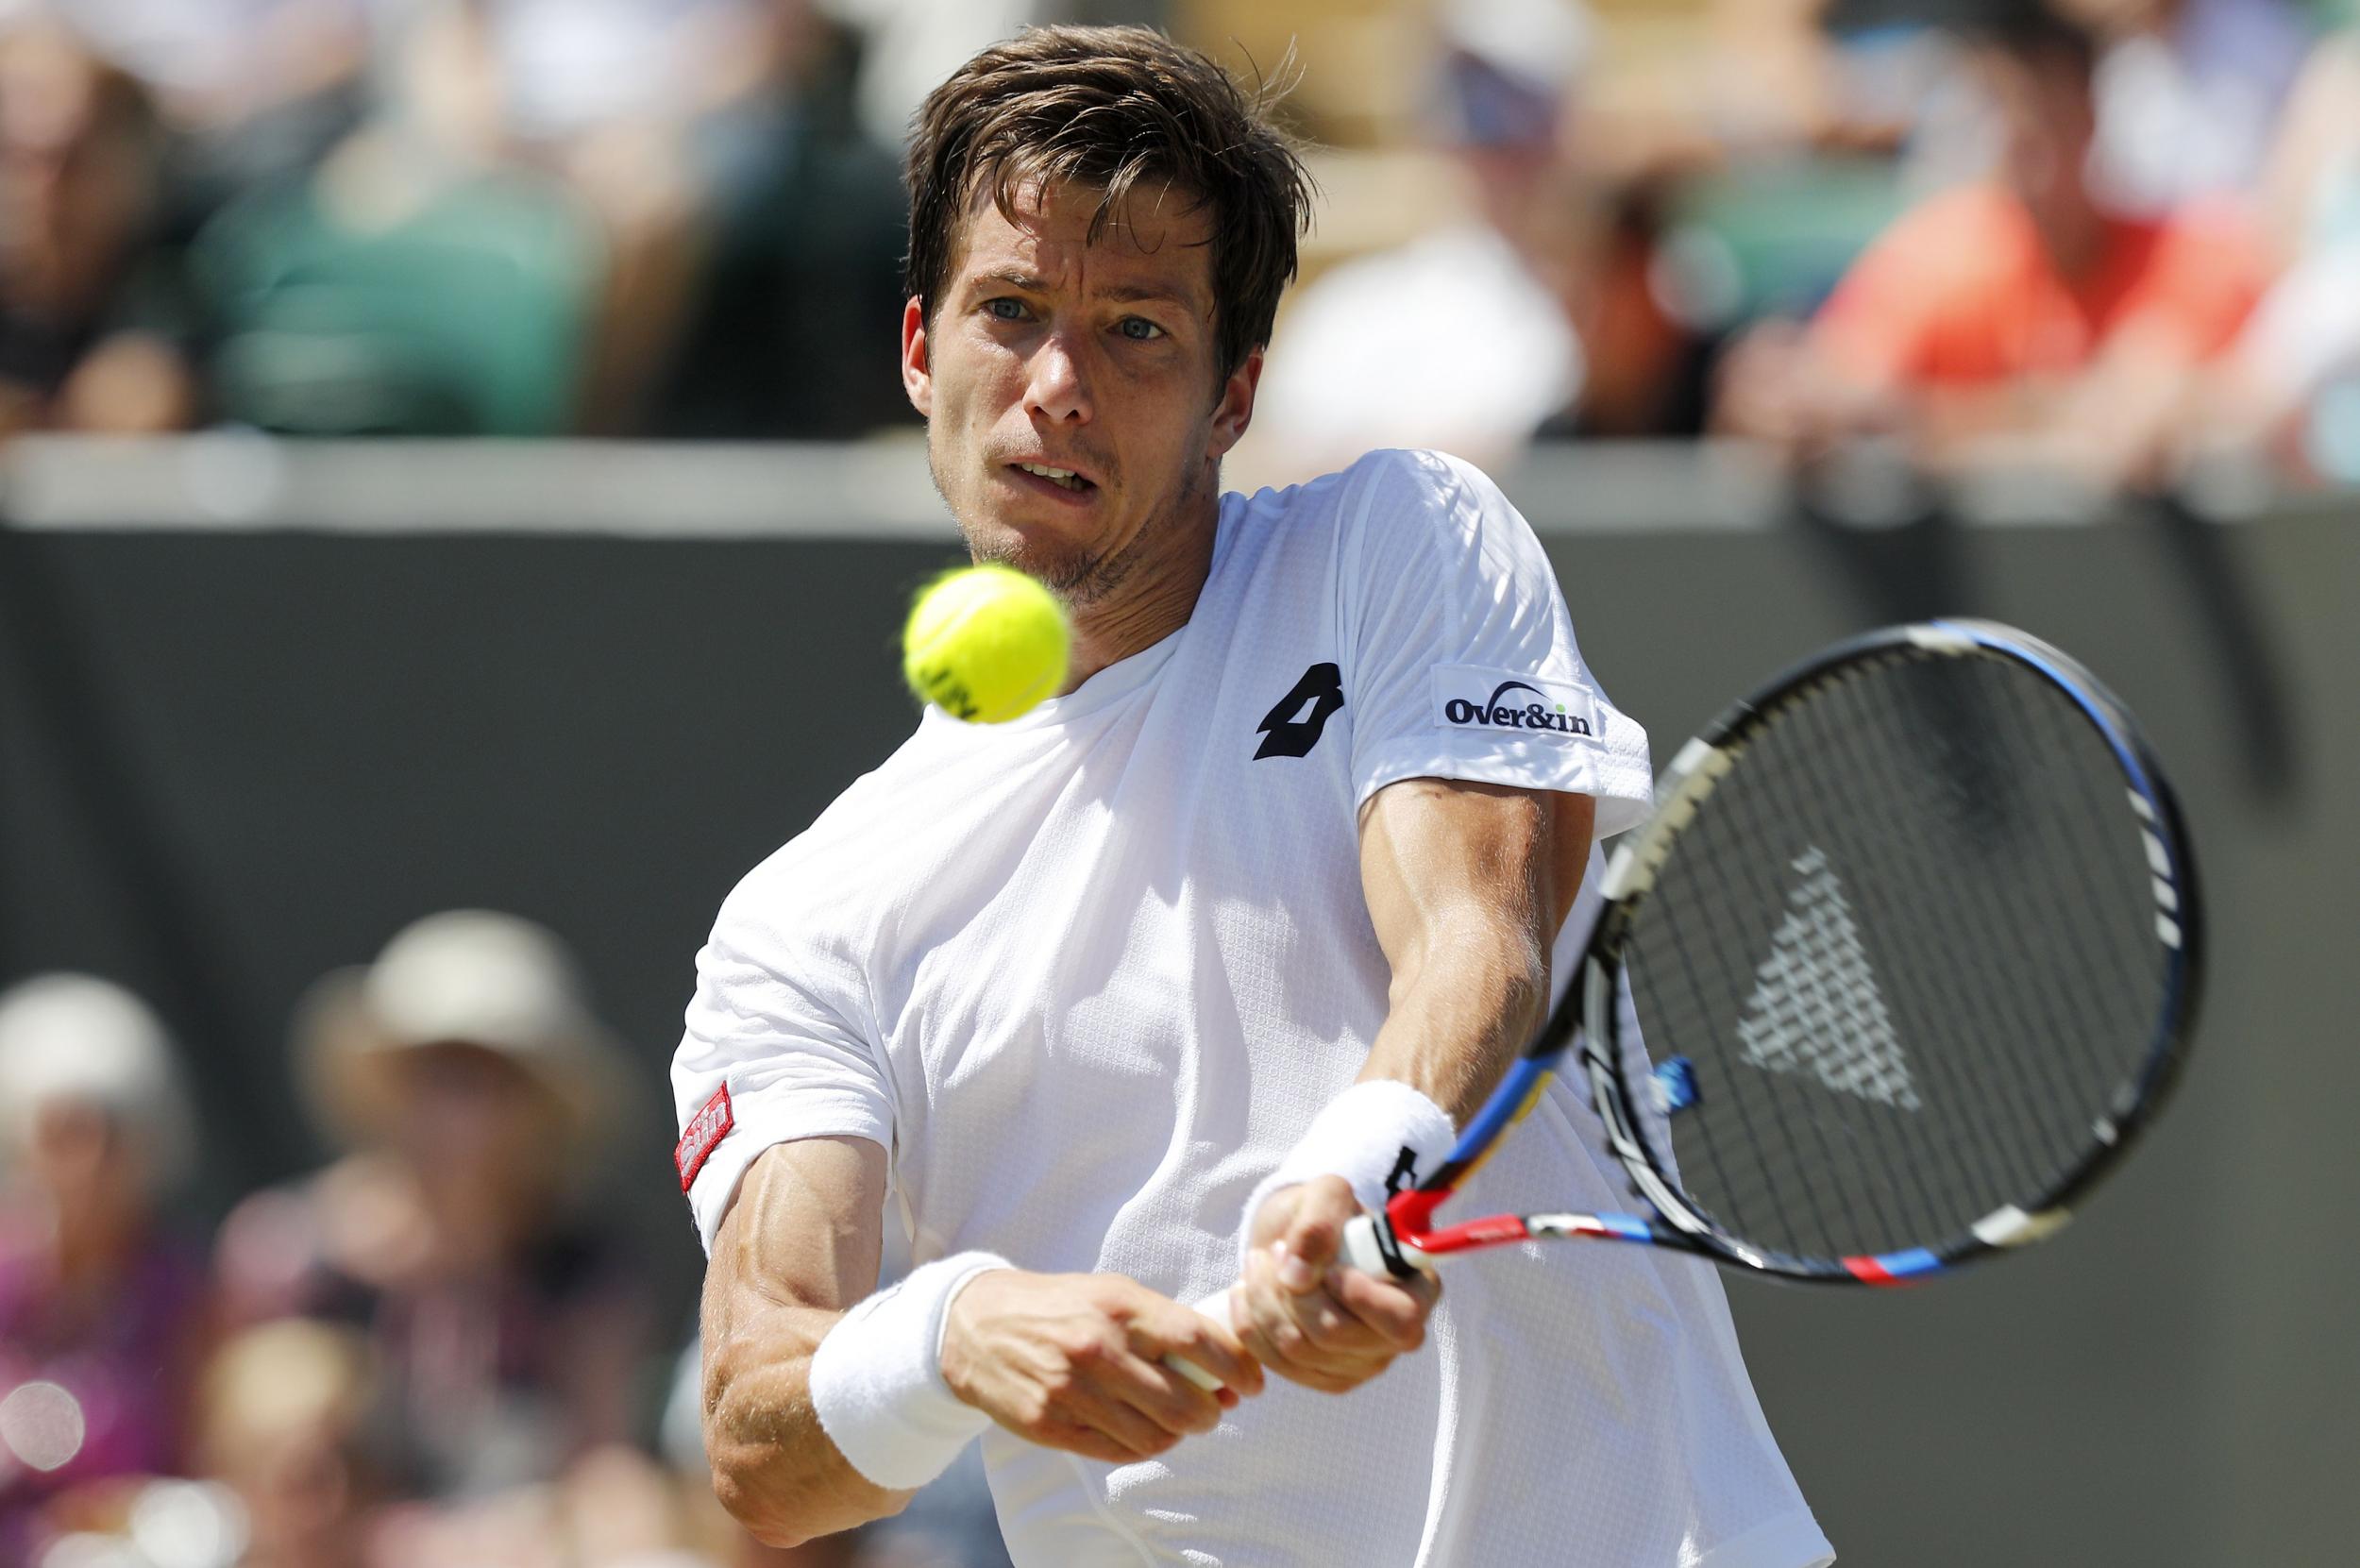 Bedene was playing in the third round of Wimbledon for the first in his career